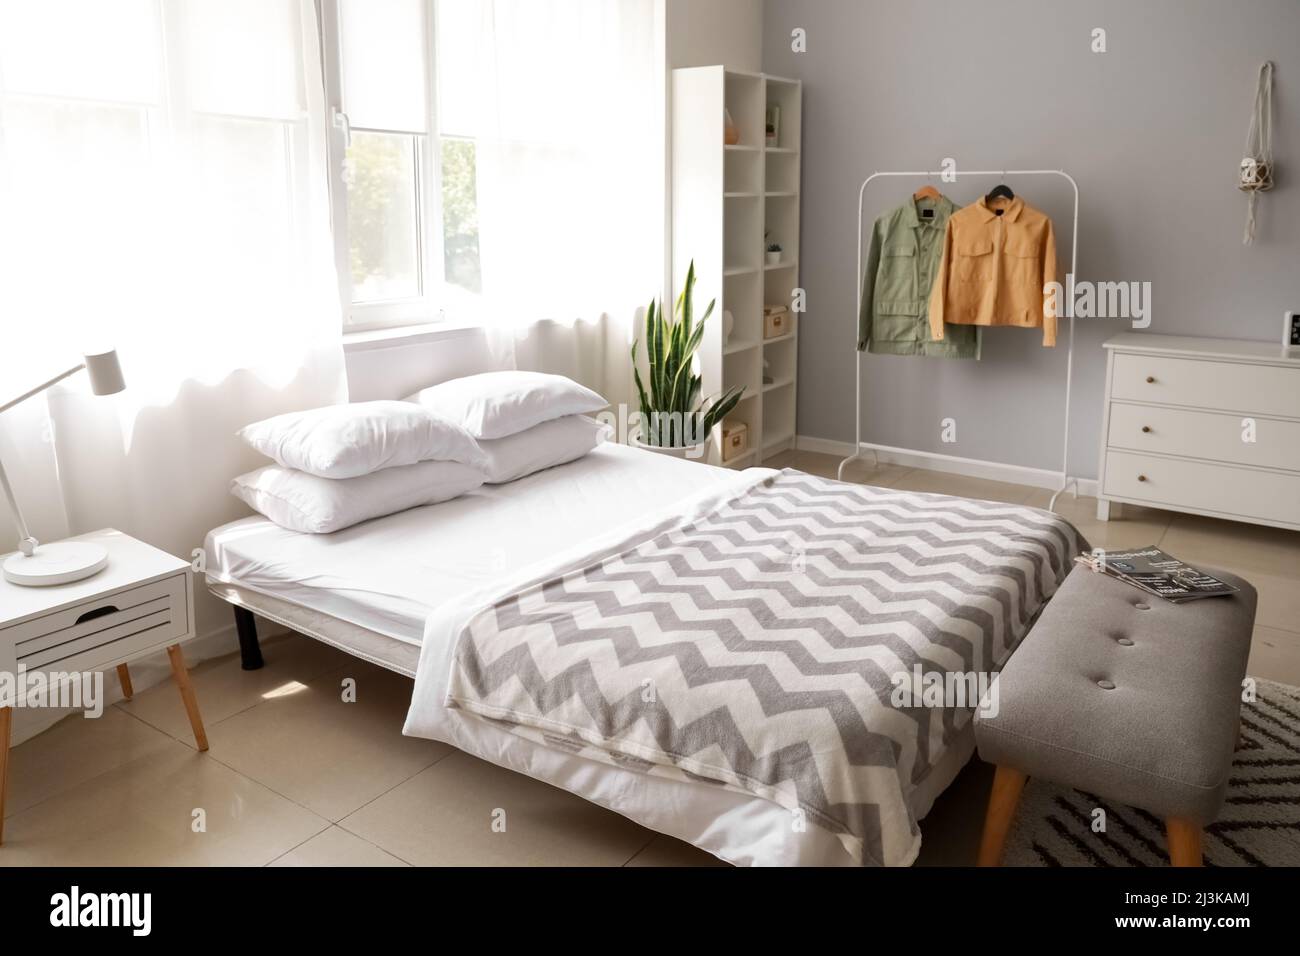 Interior of modern bedroom with rack and jackets Stock Photo